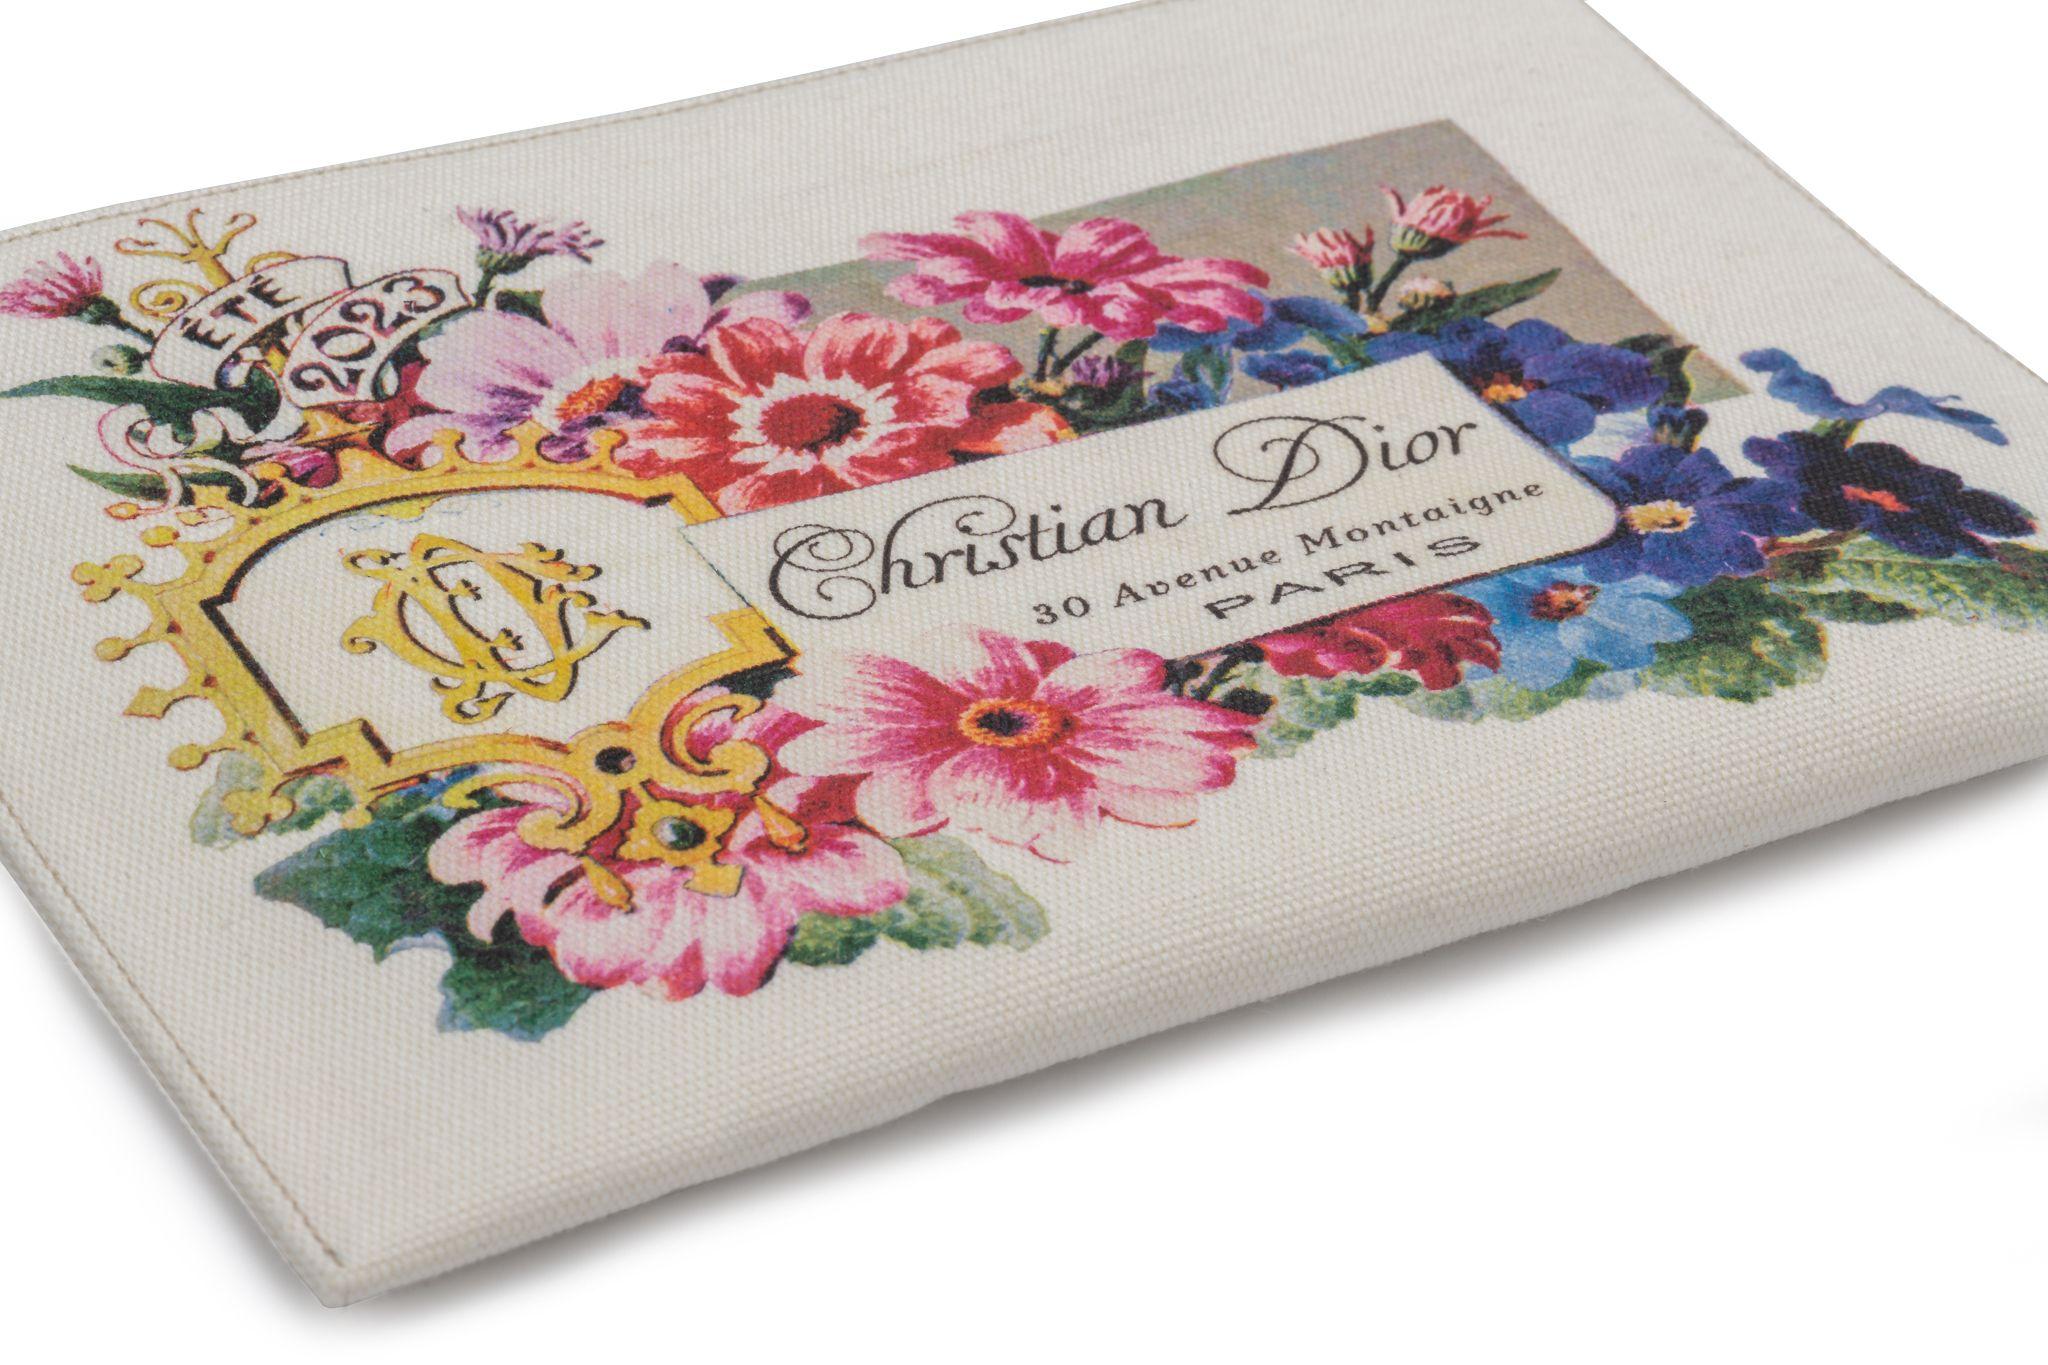 CHRISTIAN DIOR Ete 2023 30 Avenue Montaigne Paris floral print canvas zip pouch in white. It's new and comes with the original dustcover.